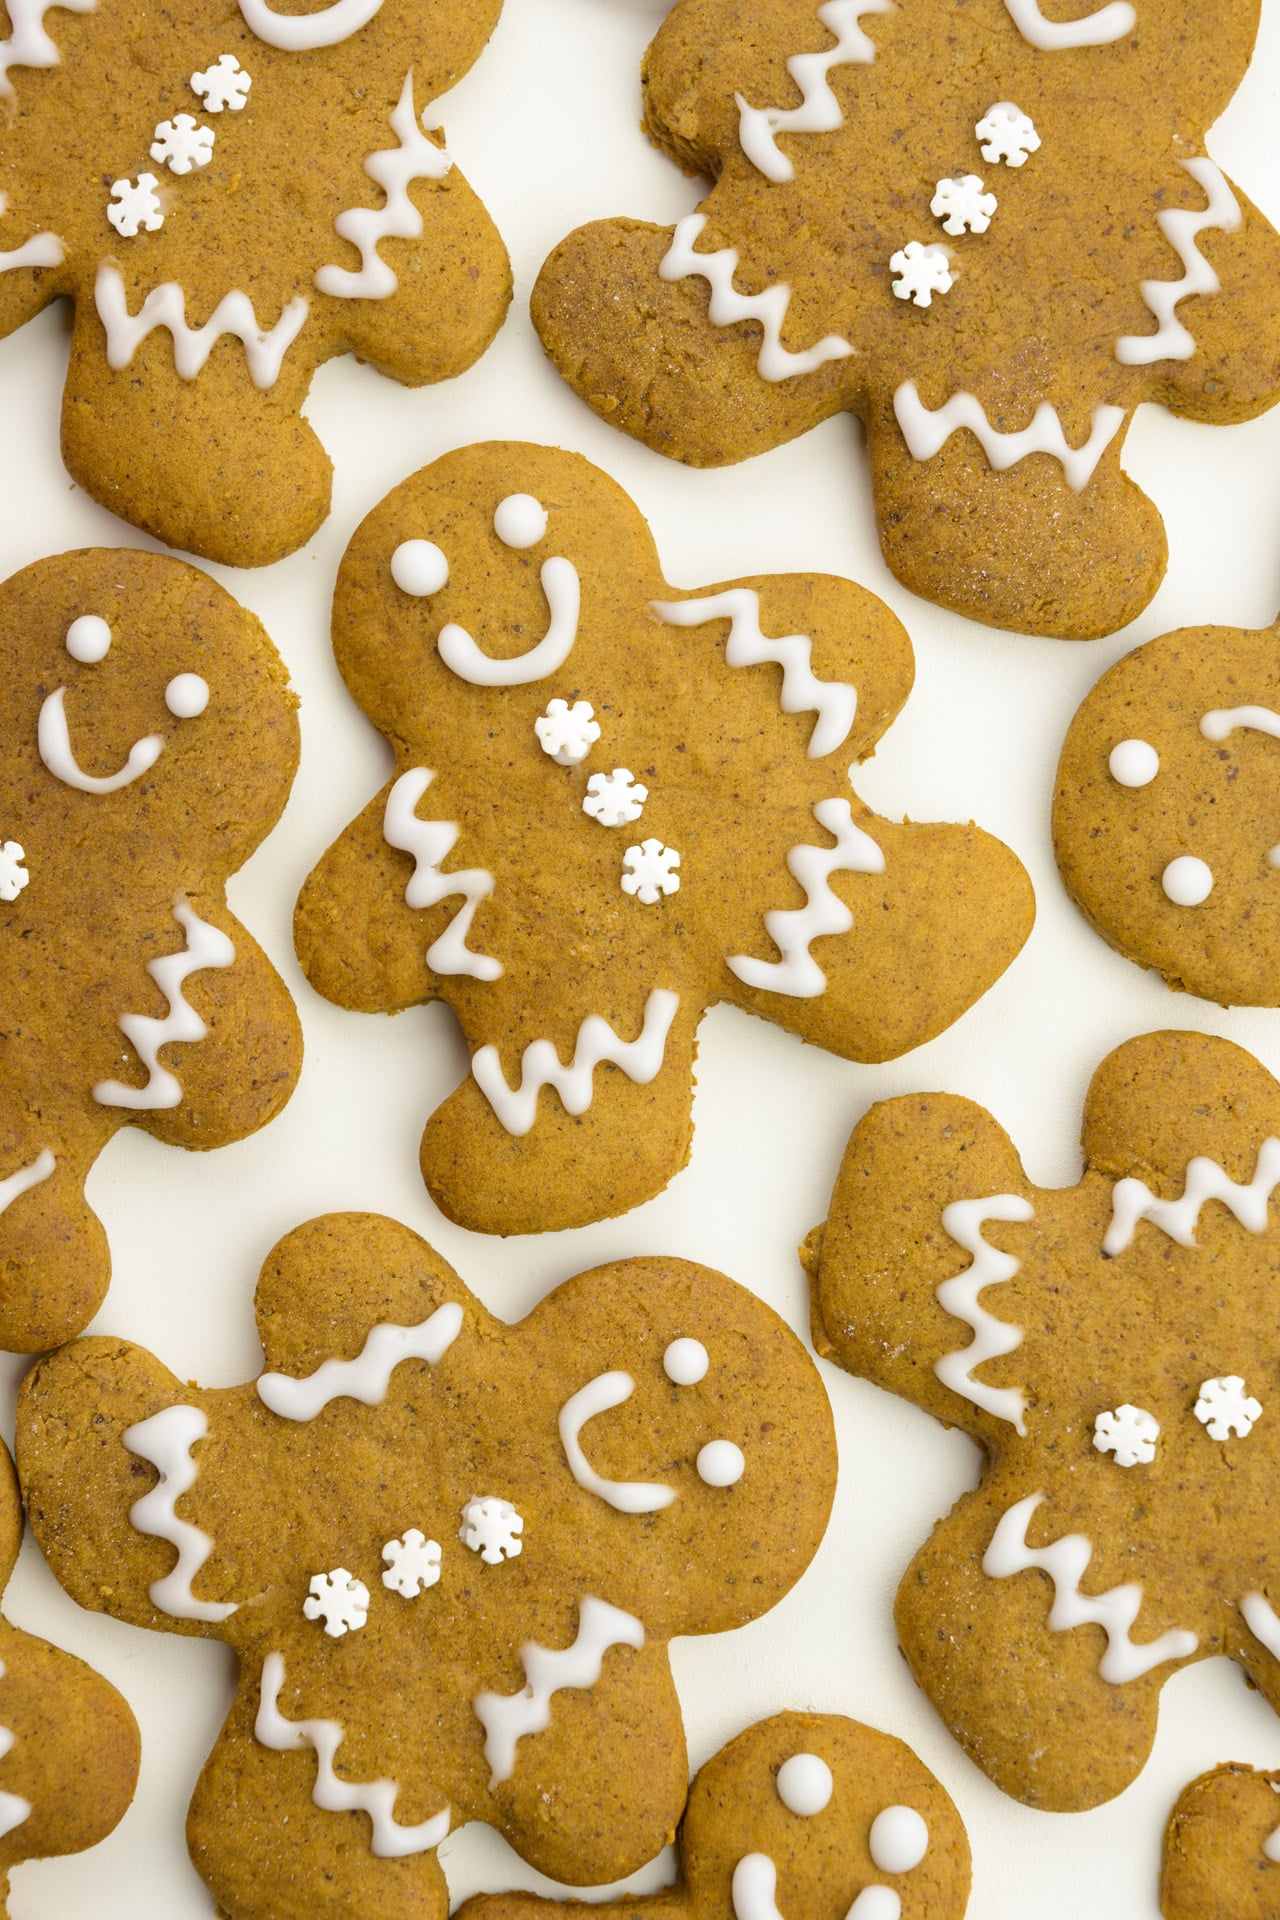 Several decorated vegan gingerbread cookies are on a white background.